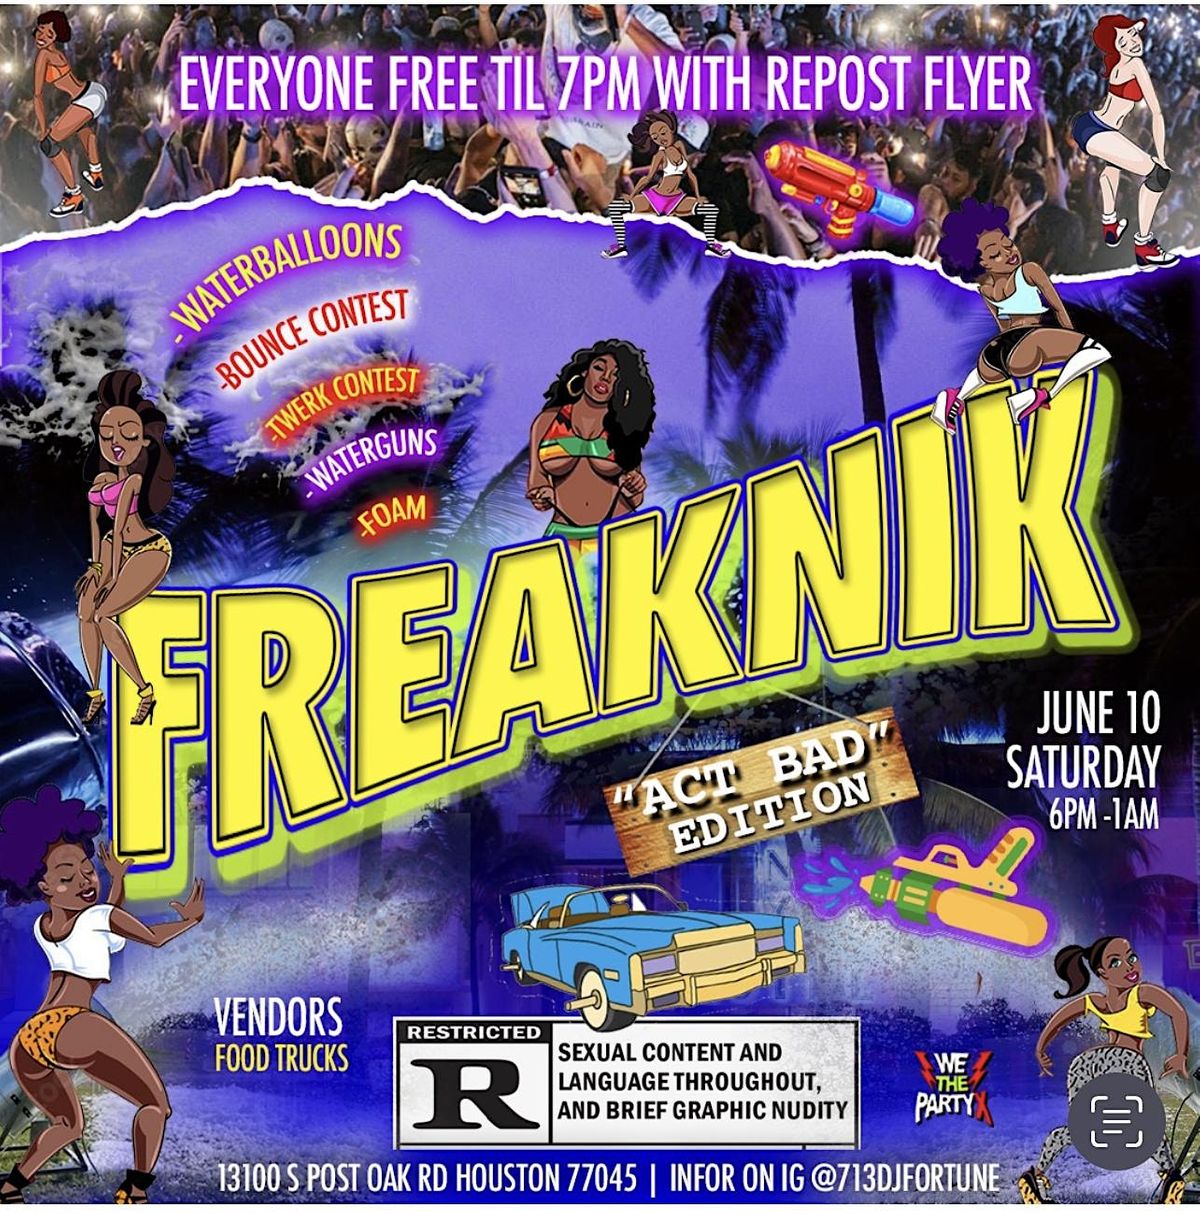 FREAKNIK ACT BAD EDITION!! BIGGEST FREAKNIK PARTY OF THE SUMMER!